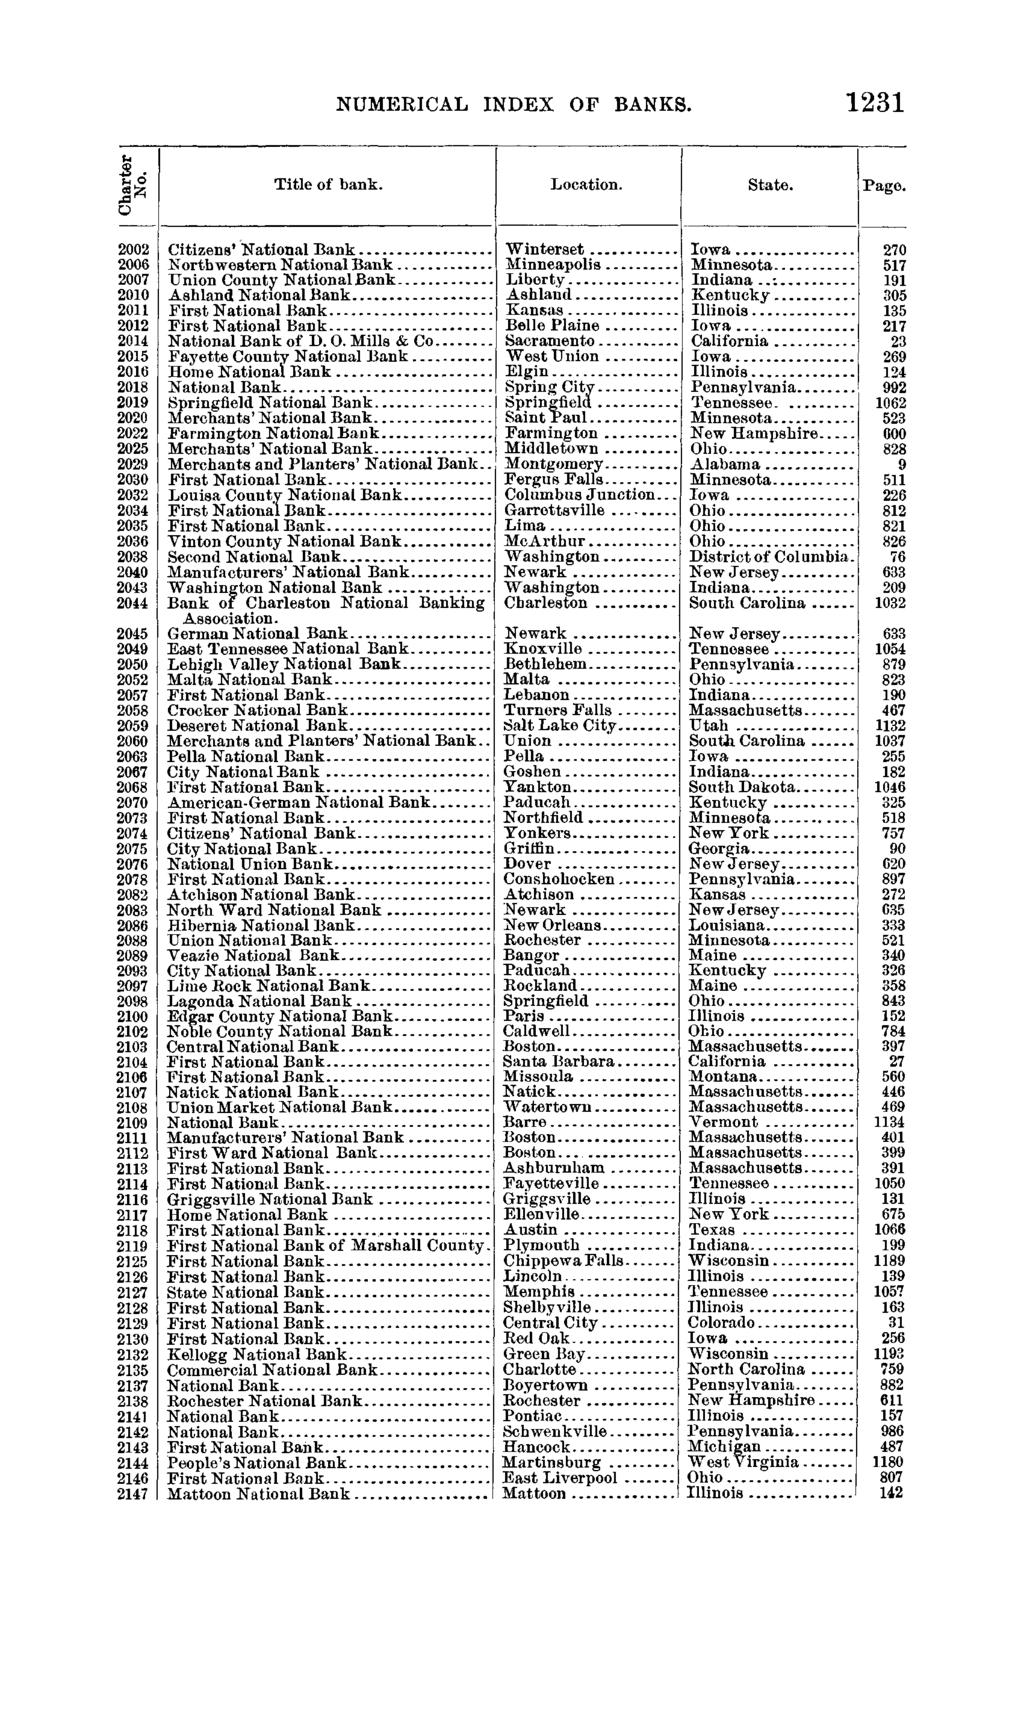 1898 NUMERICAL INDEX OF BANKS.